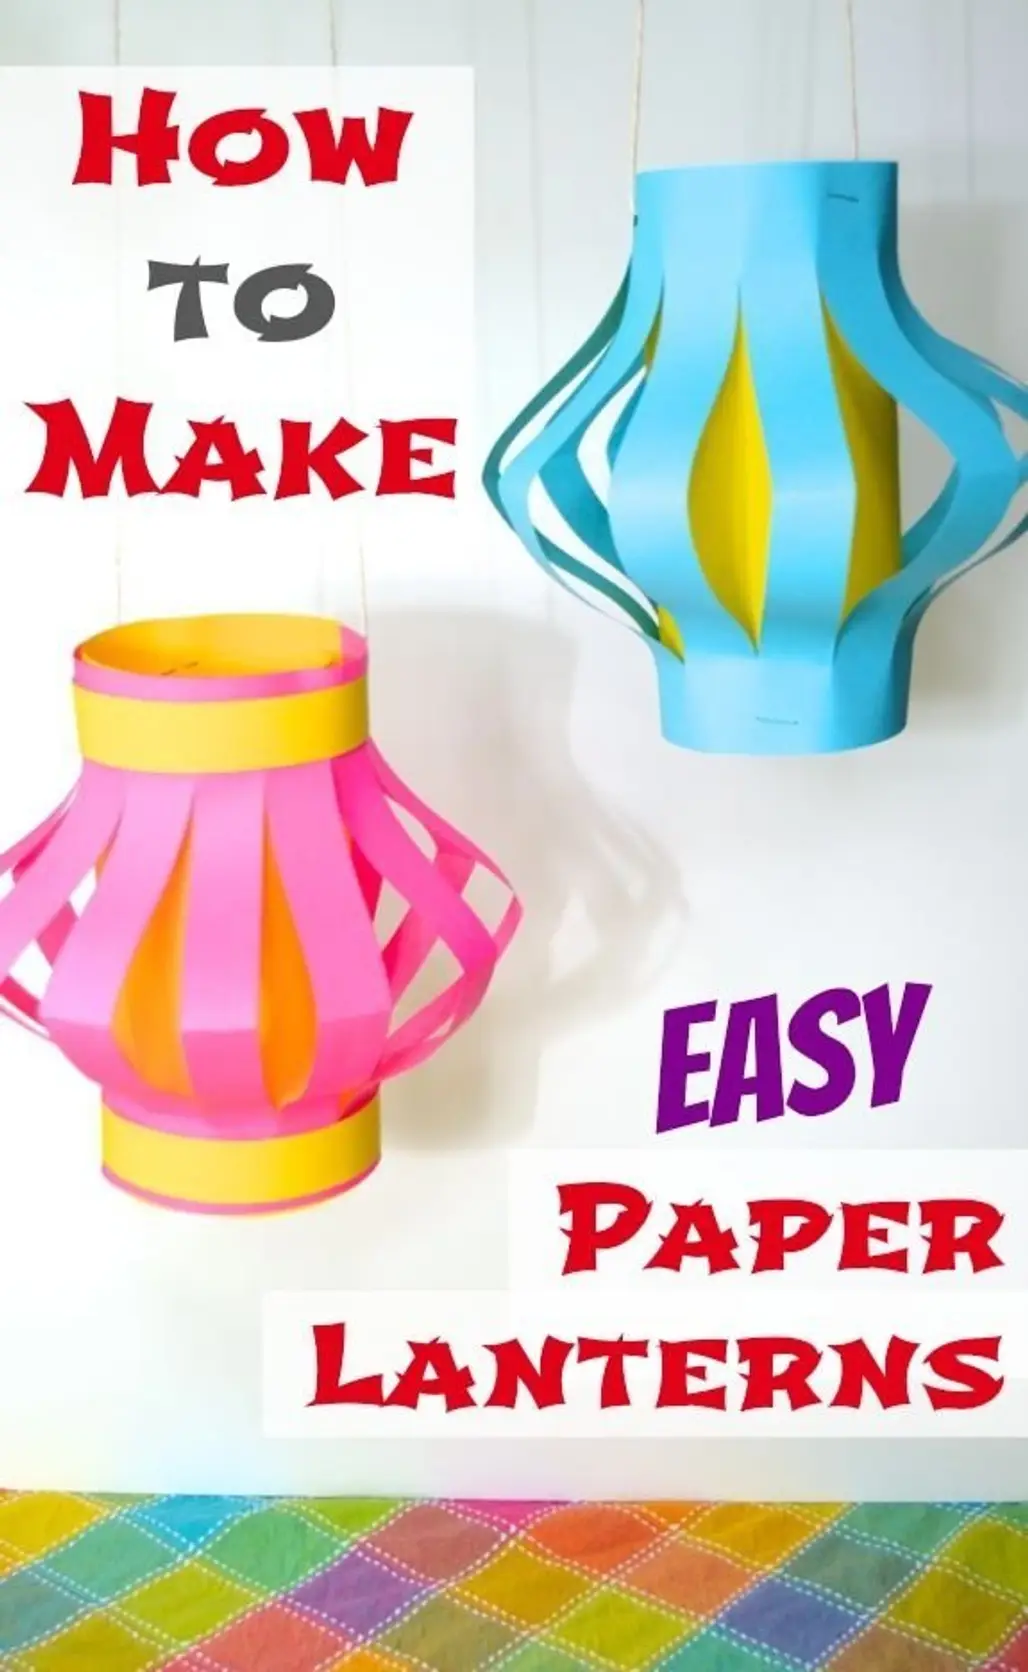 How to Make Easy Paper Lanterns